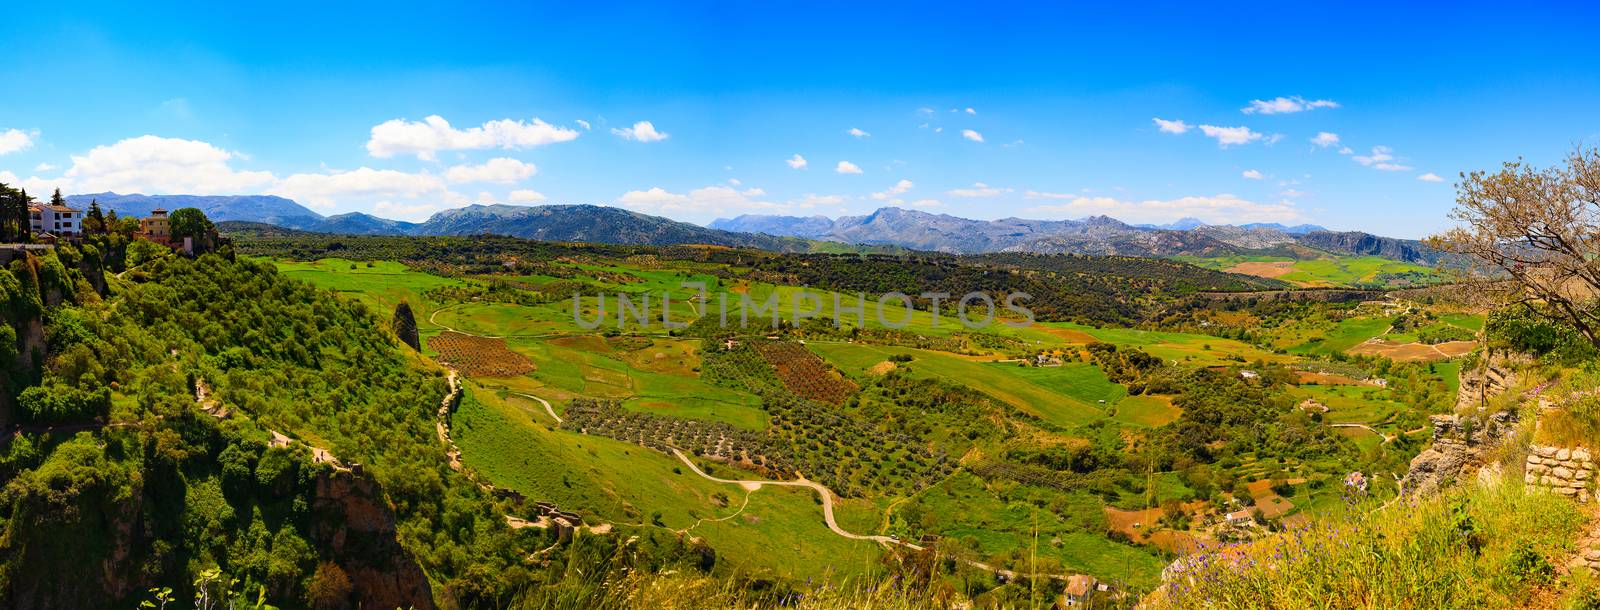 Beautiful view of the valley, Ronda, Spain by Nobilior